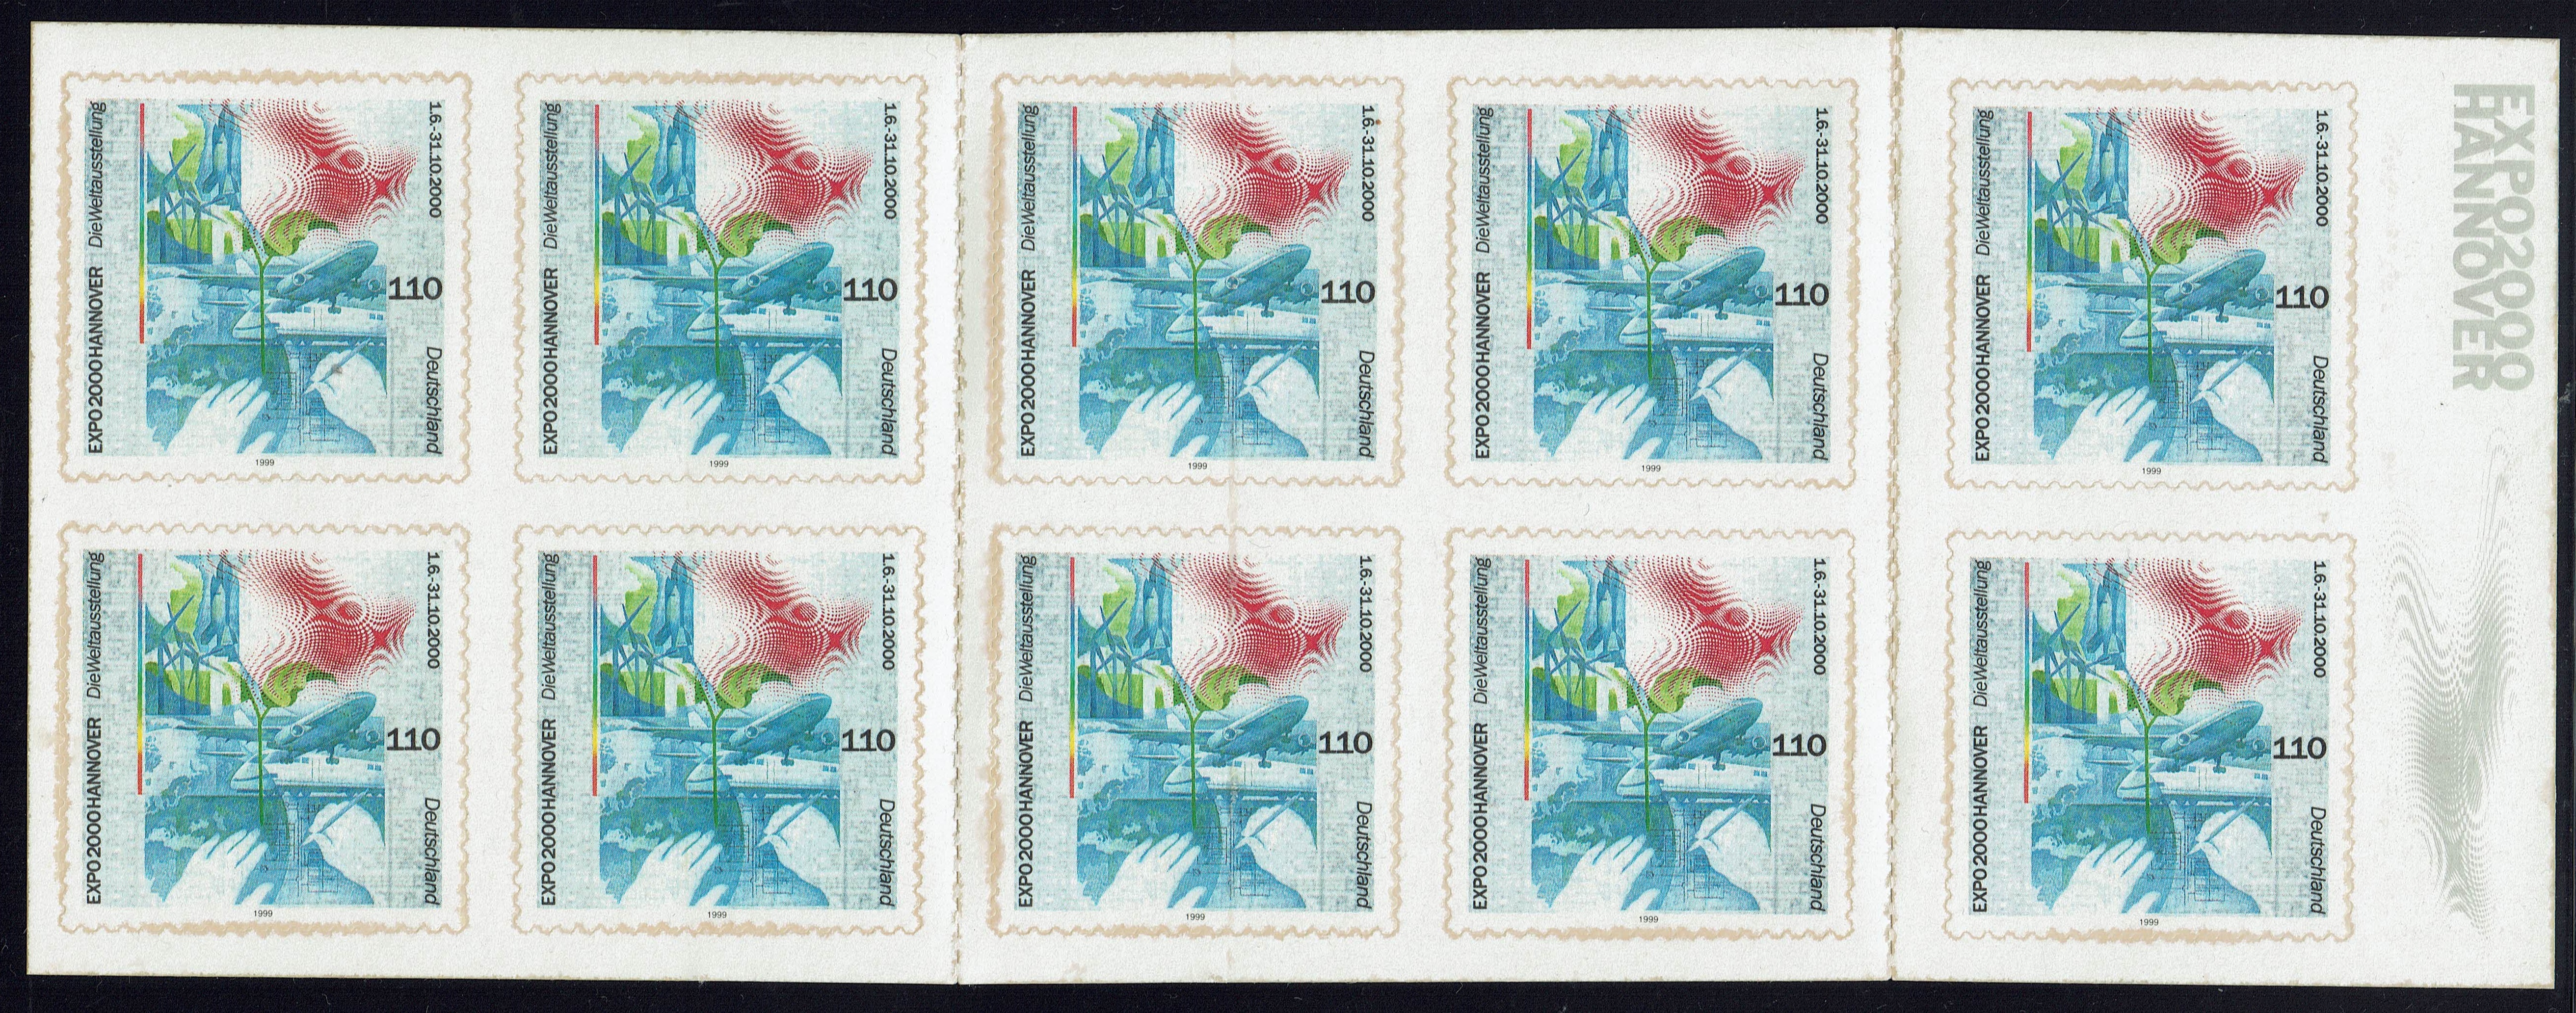 Germany SG 2959 Booklet